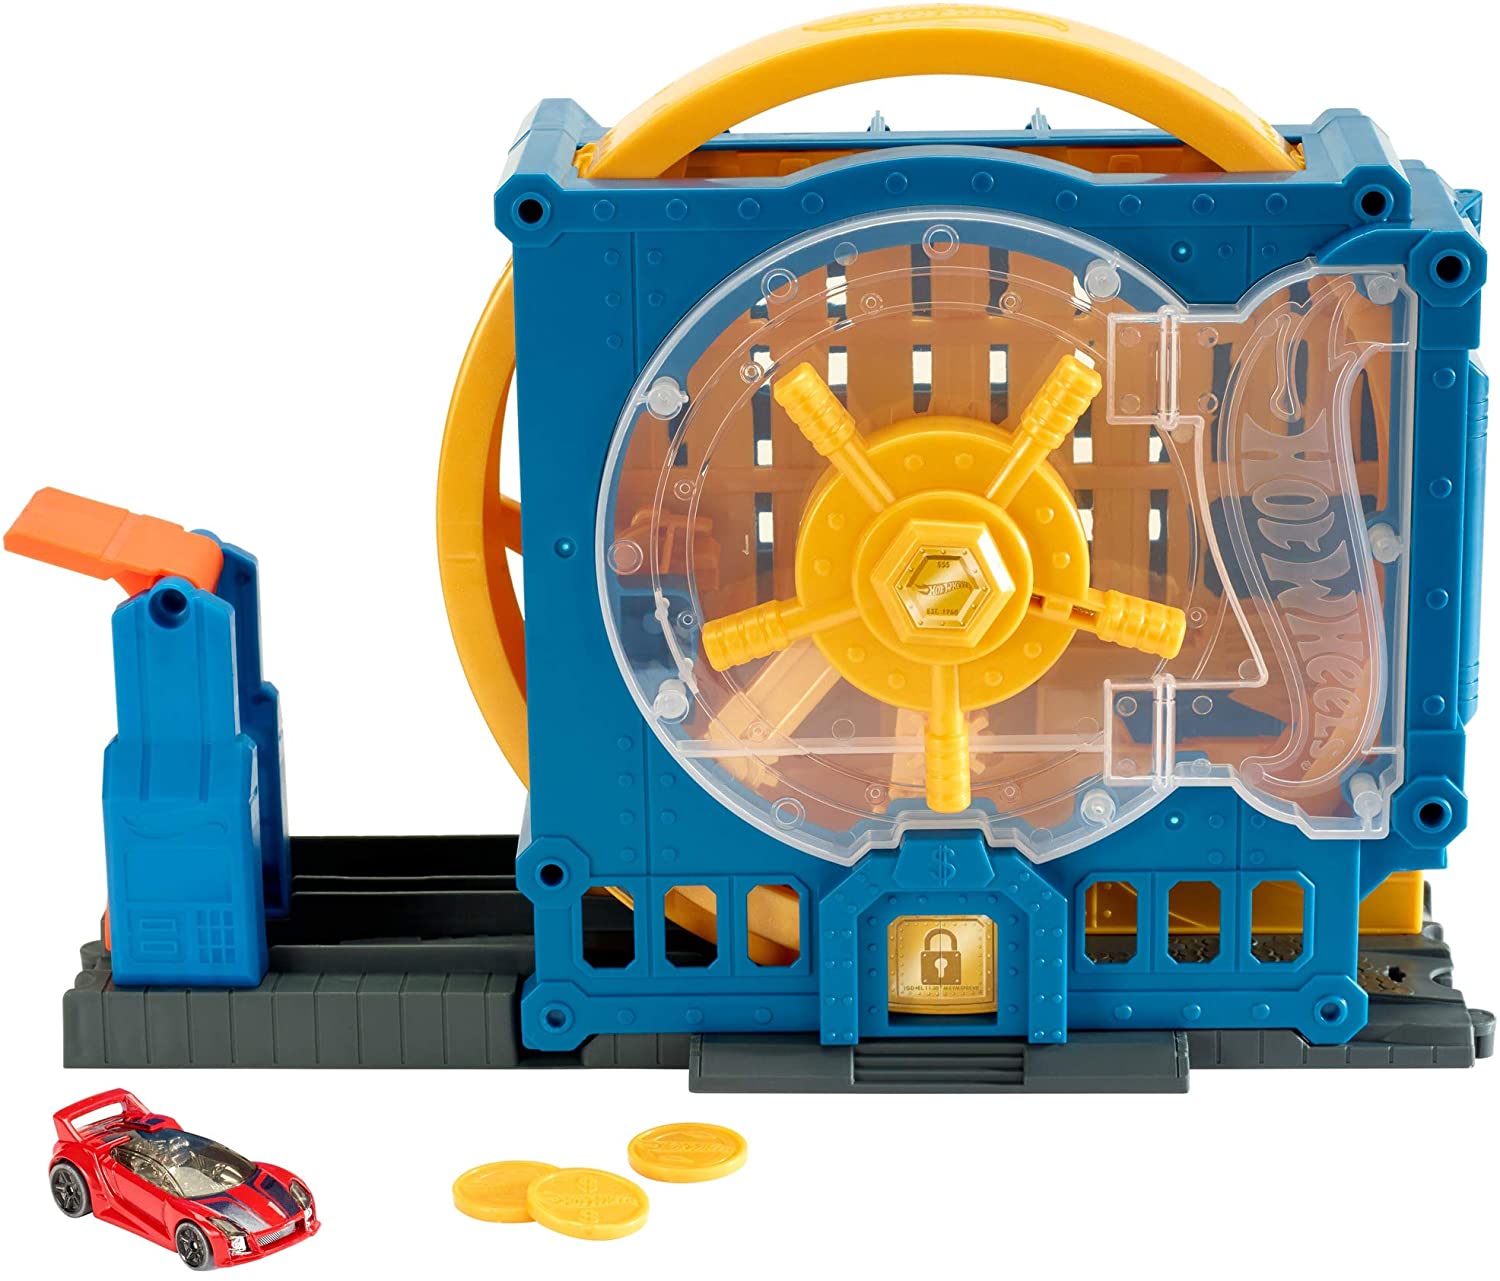 Hot Wheels Gbf96 Super Bank Break Play Set Toy For Ages 4 Years And Above M